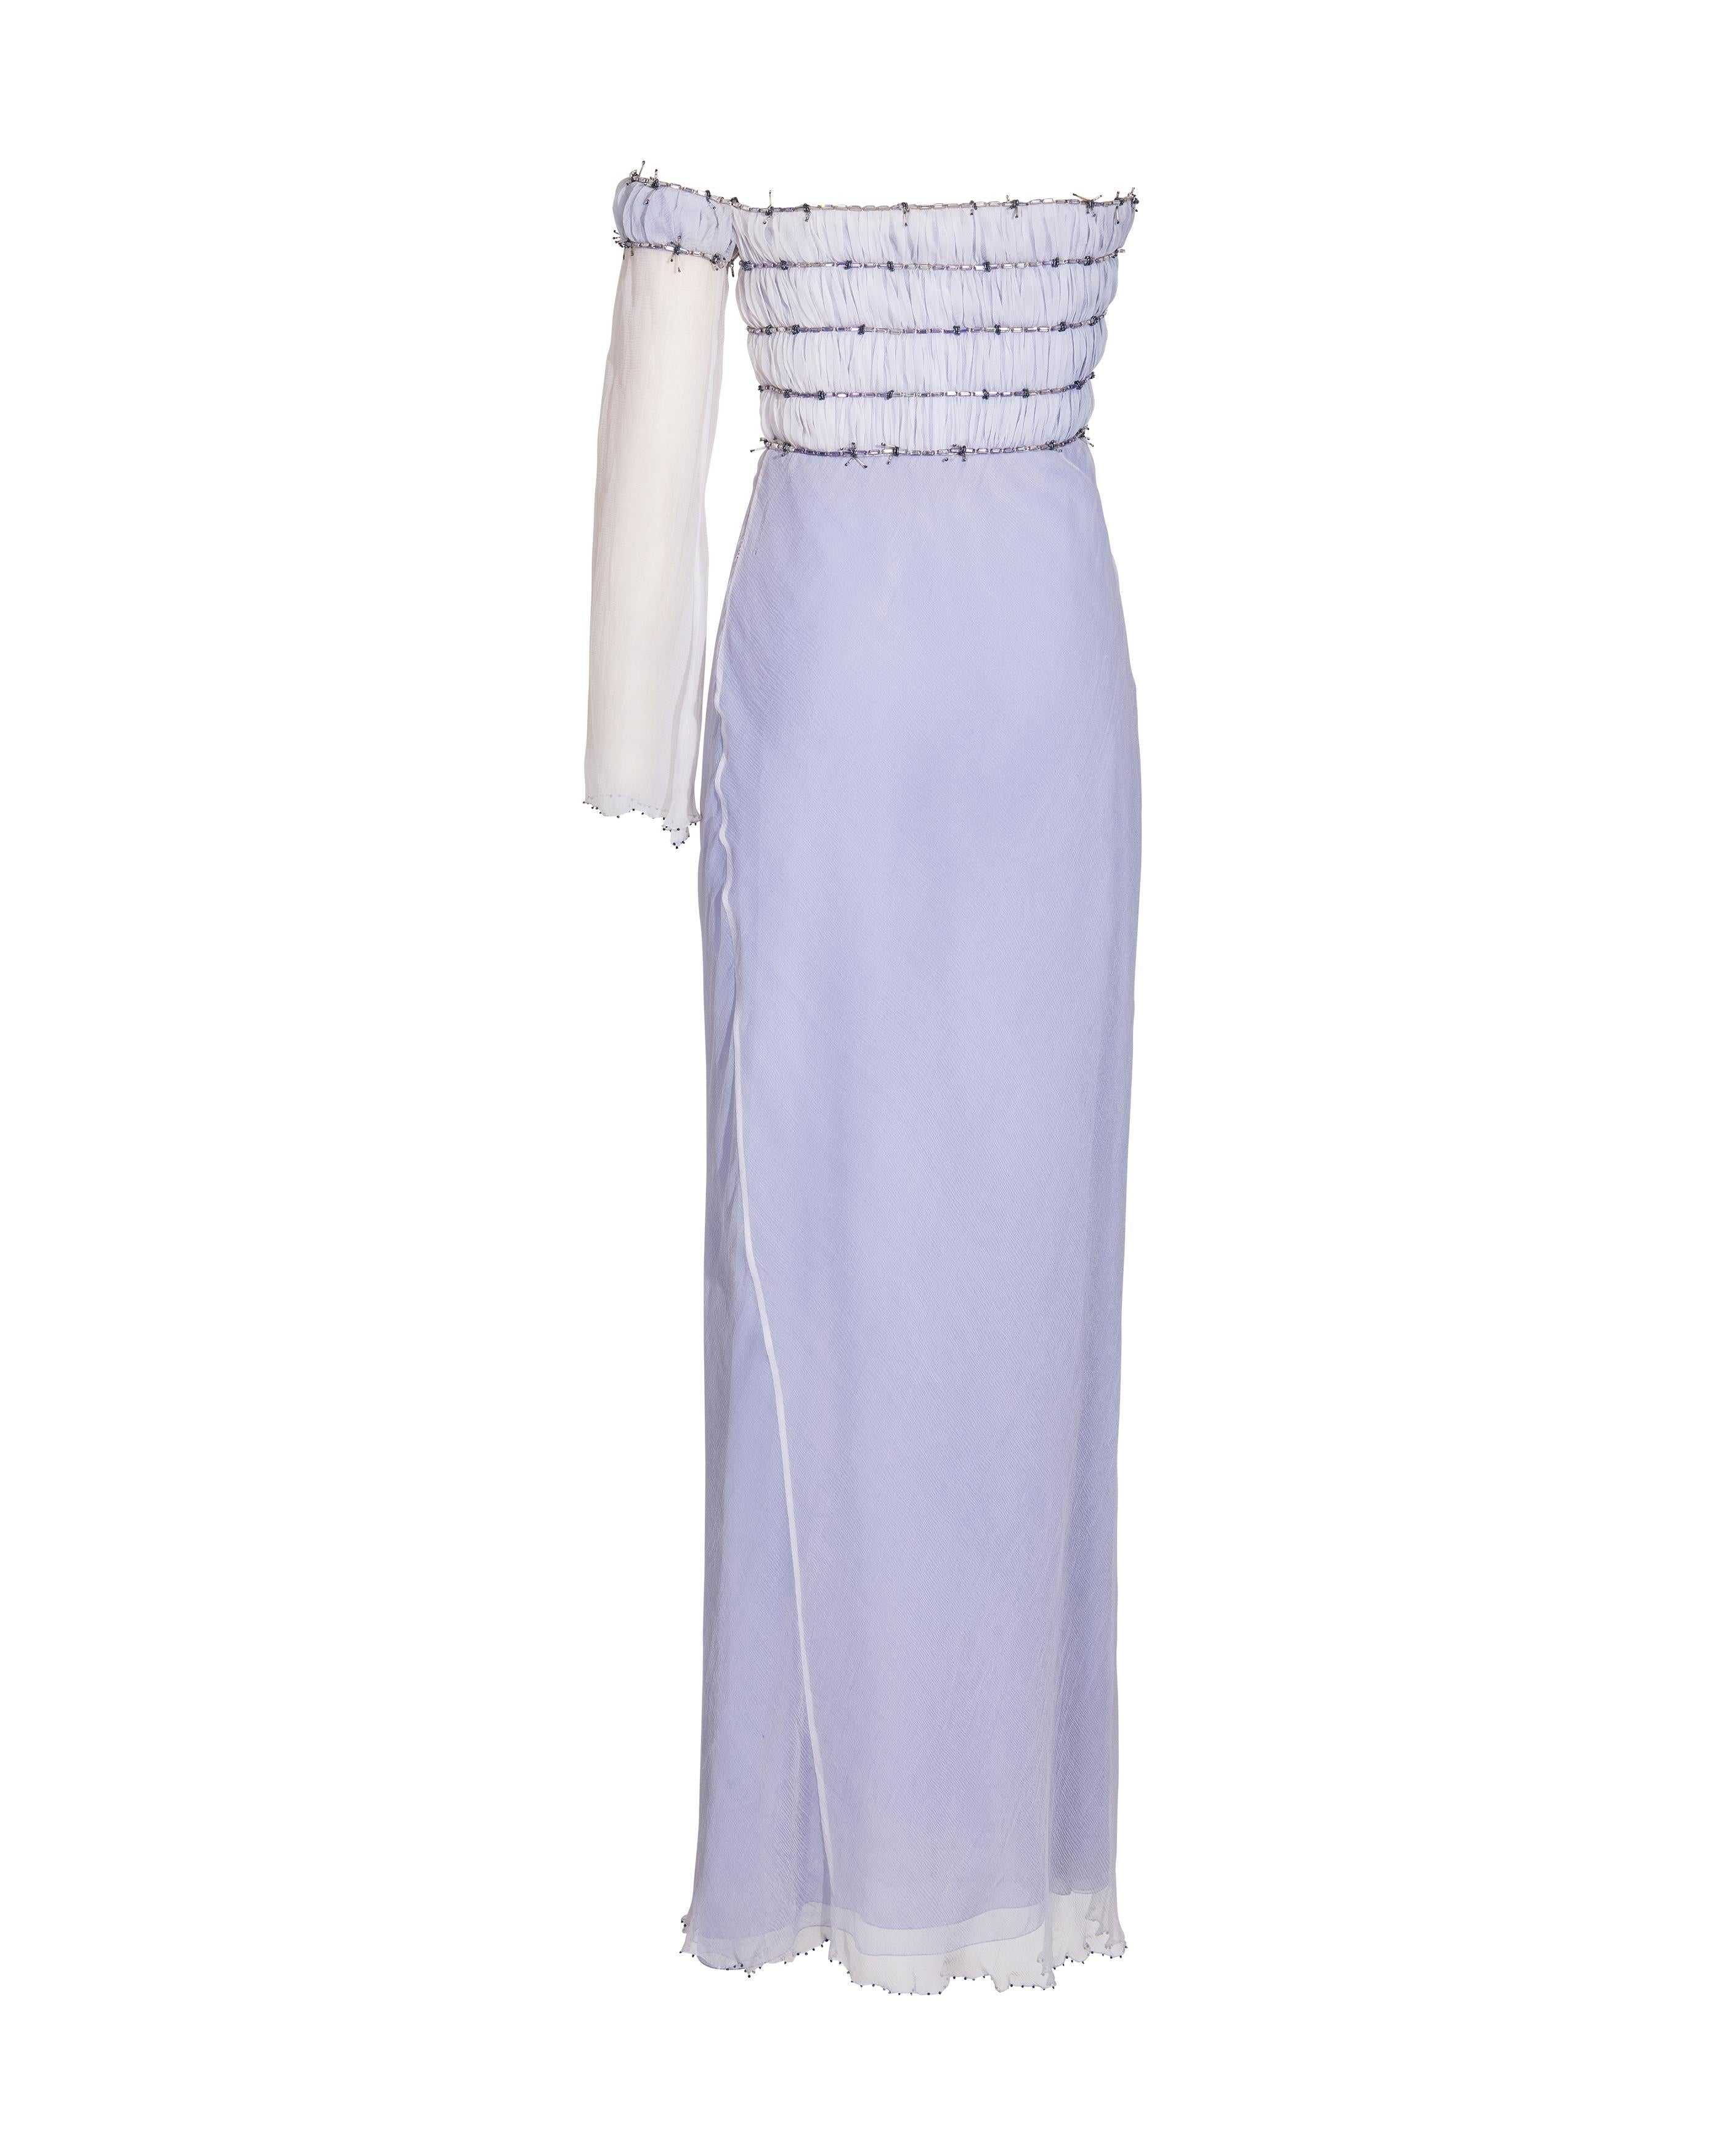 A/W 1998 Gianni Versace Lilac Strapless One-Shoulder 'Barbed Wire' Gown 2